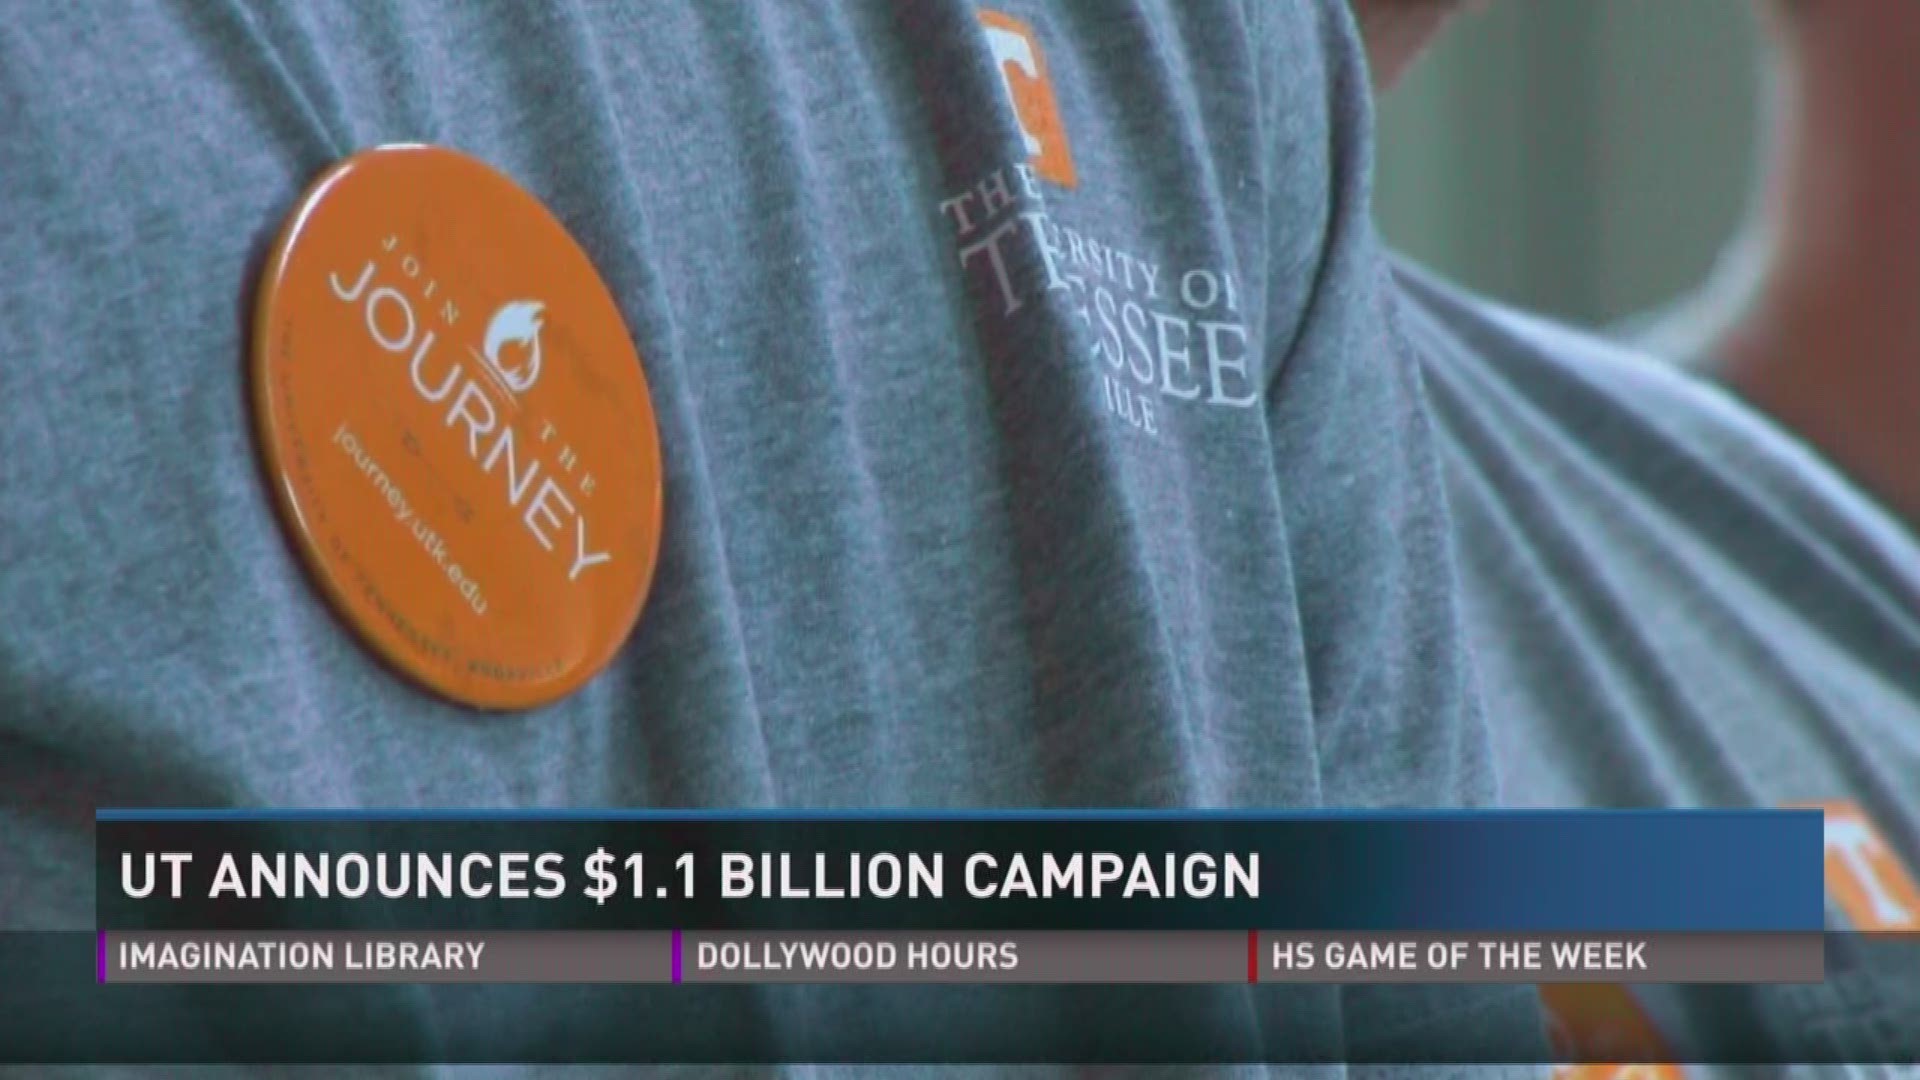 Sept. 22, 2017: The University of Tennessee is kicking off the formal start of a $1.1 billion fundraising campaign.